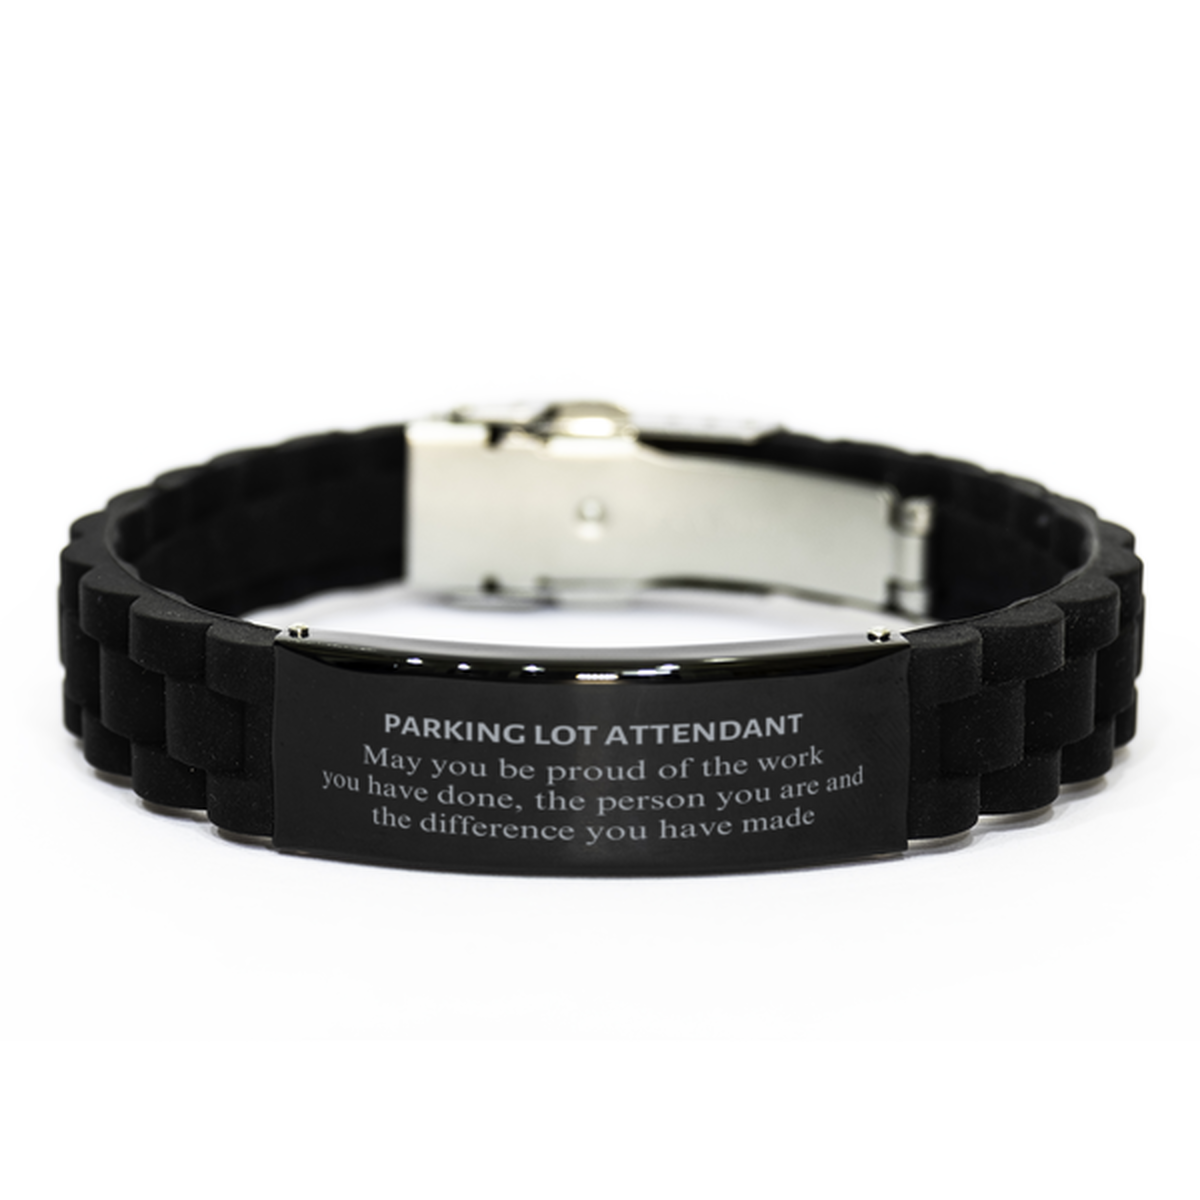 Parking Lot Attendant May you be proud of the work you have done, Retirement Parking Lot Attendant Black Glidelock Clasp Bracelet for Colleague Appreciation Gifts Amazing for Parking Lot Attendant